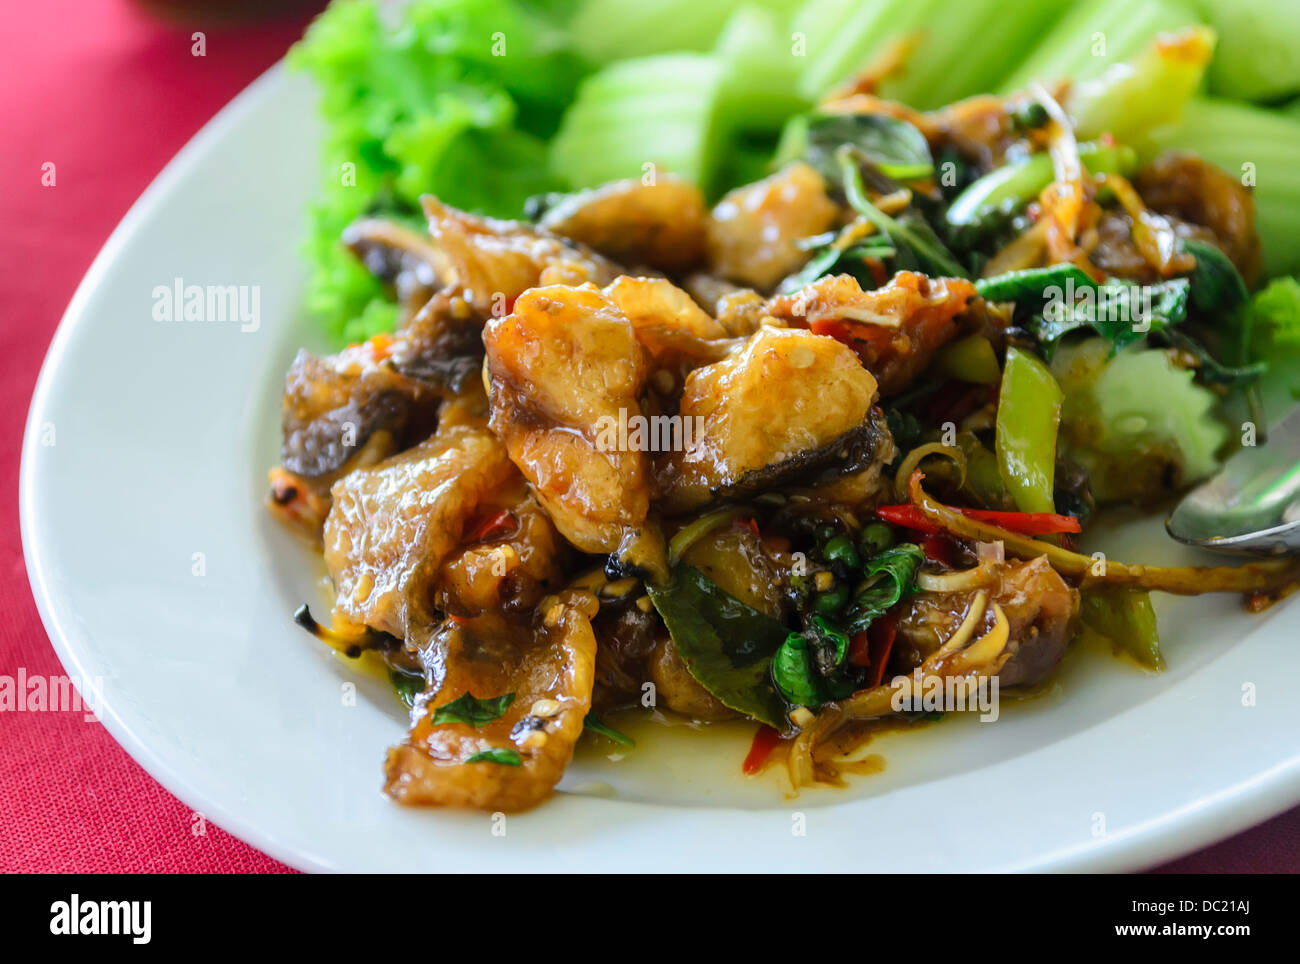 Fried spicy fish for sale in a restaurant Stock Photo